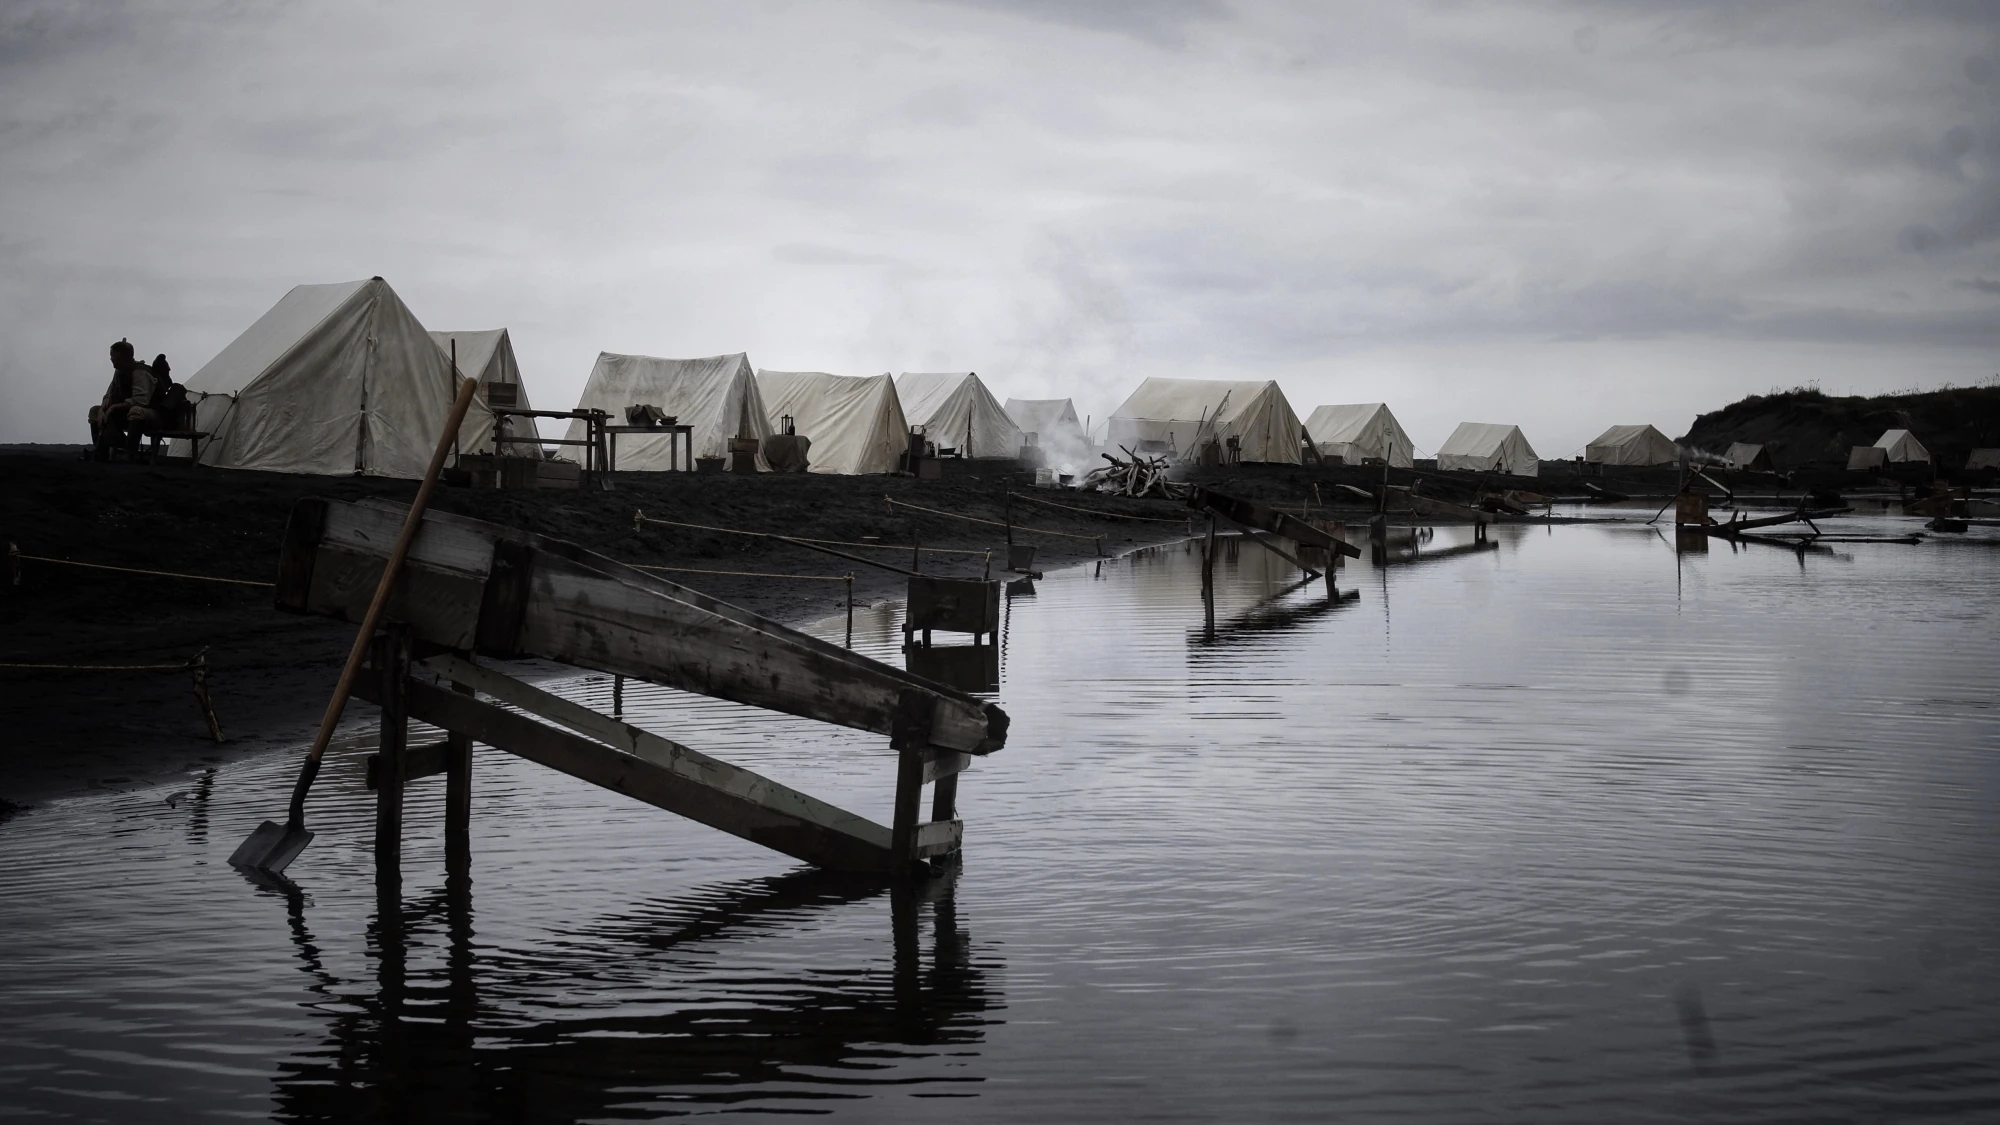 Tents line a river bank with wooden structures standing in the water. 